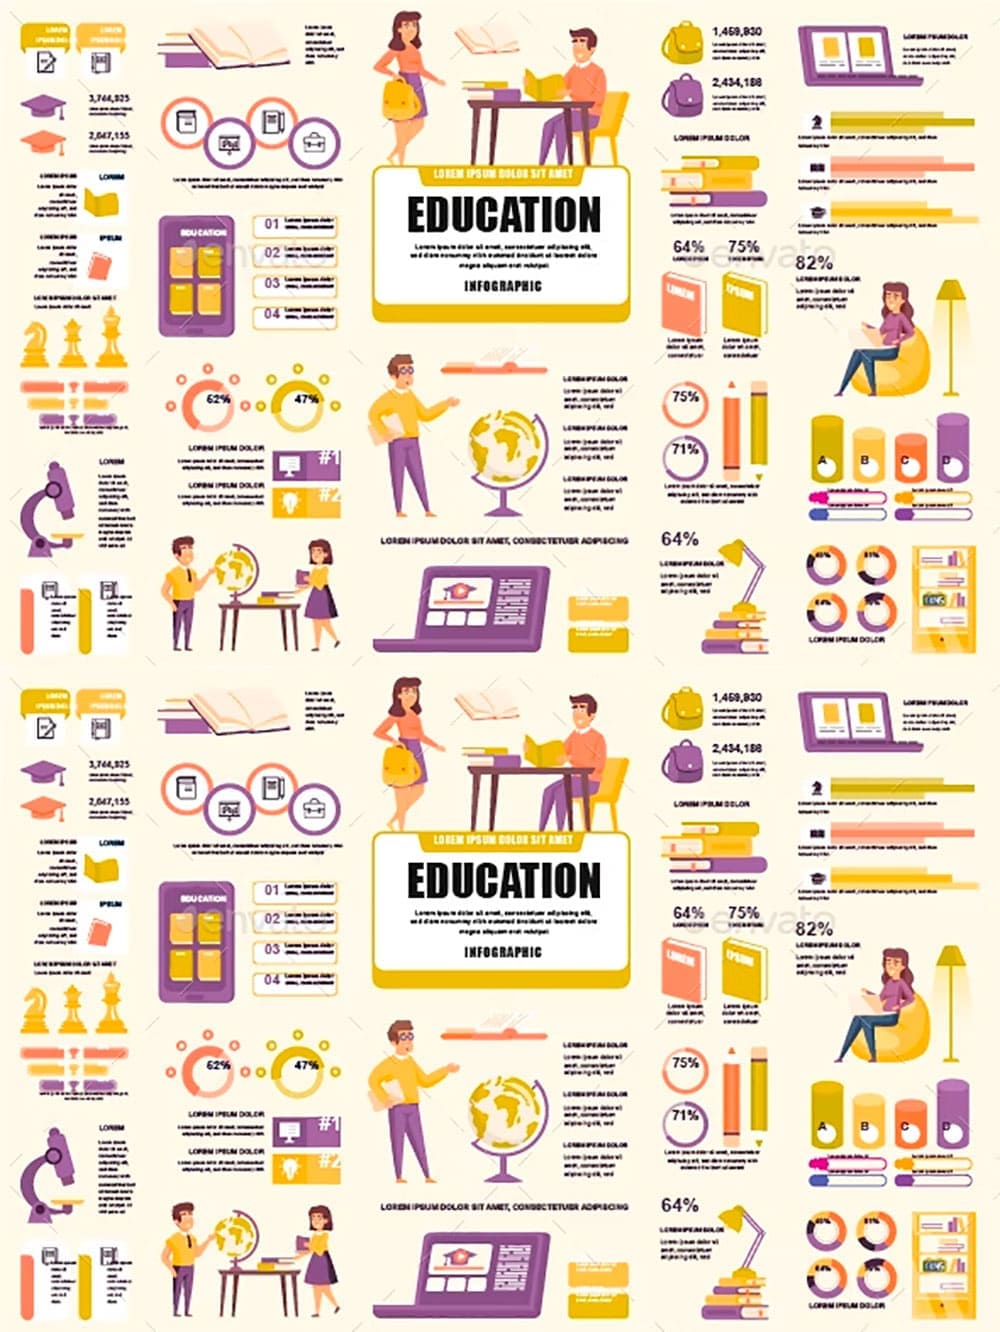 Education infographics, picture for pinterest.